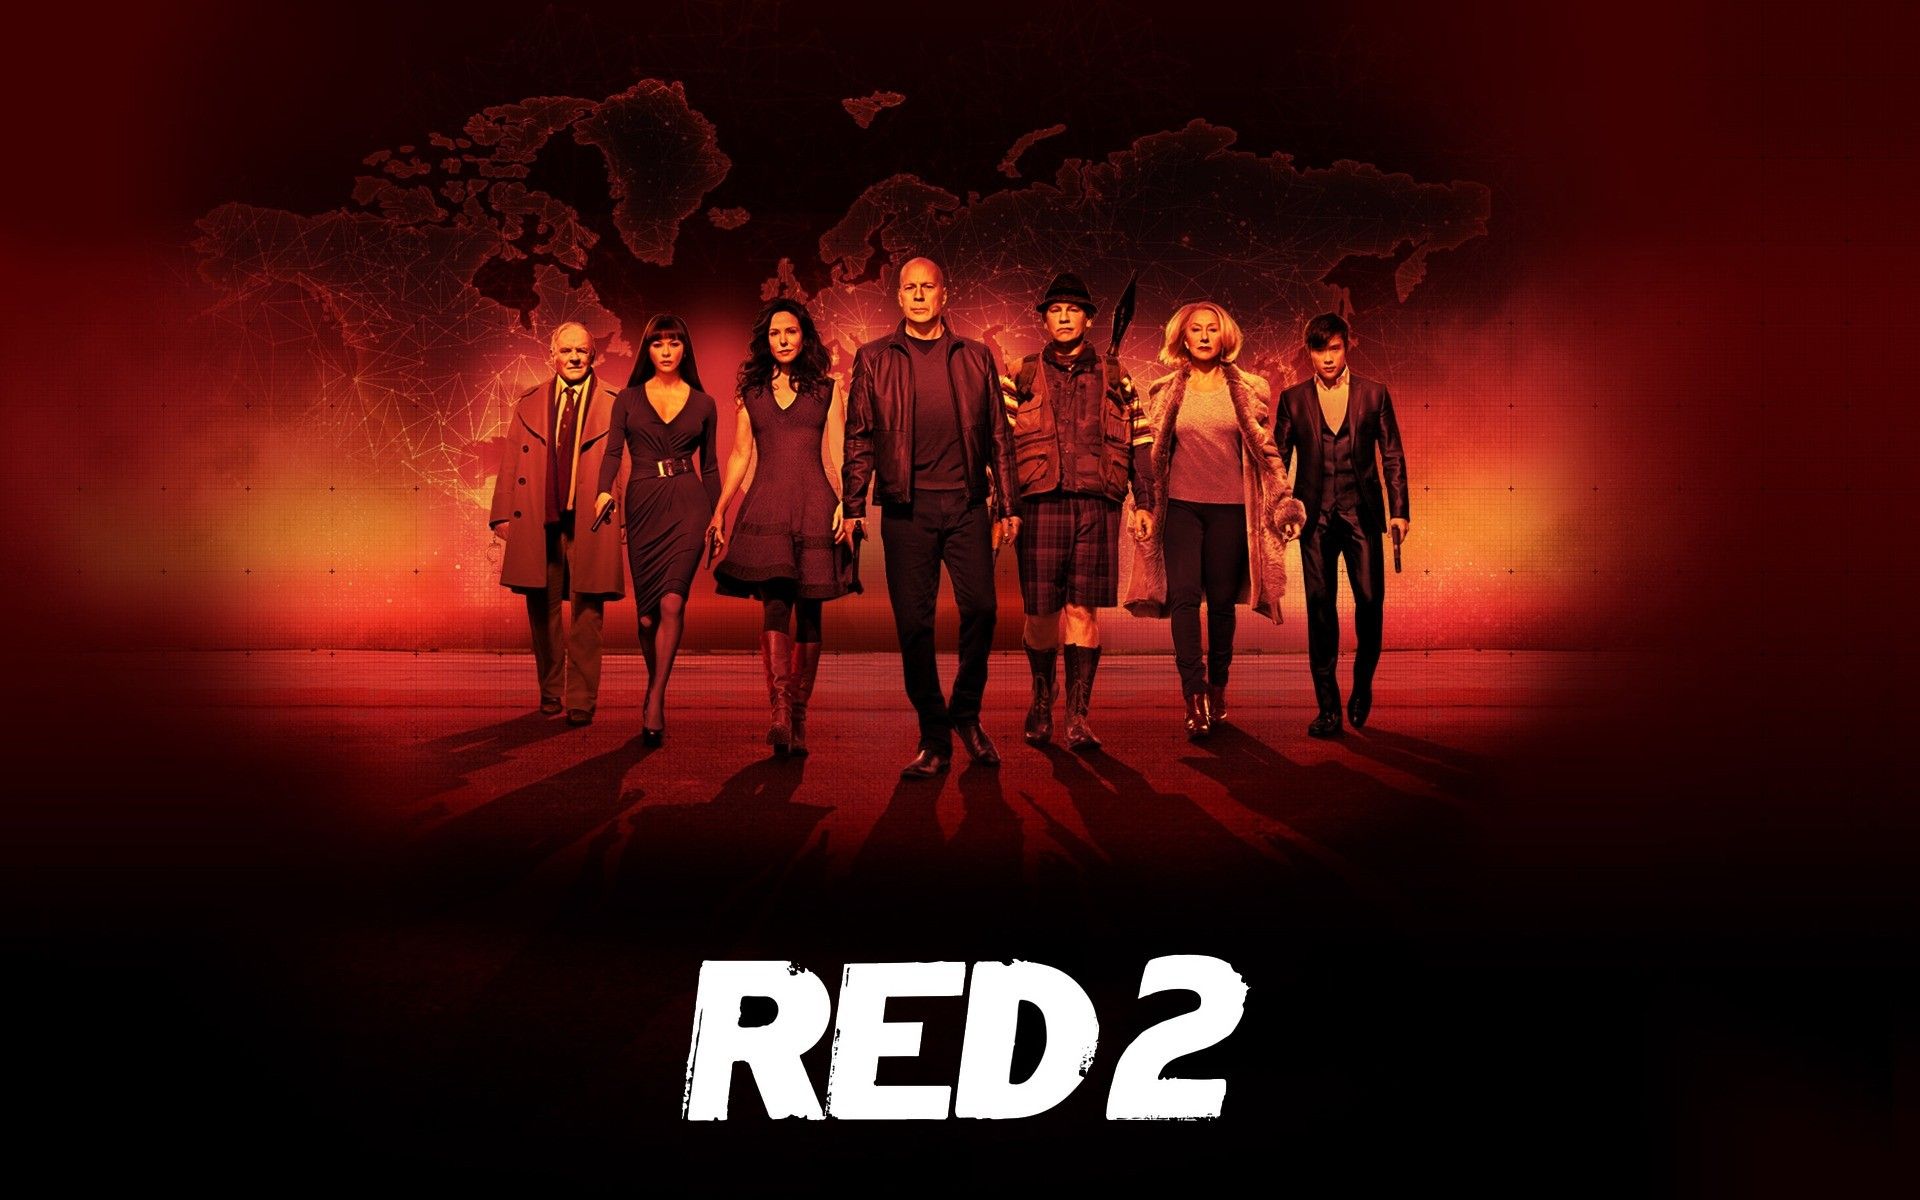 Movies Man Woman Group Adult Music Red 2 Movie Red 2 Soundtrack Cover Art